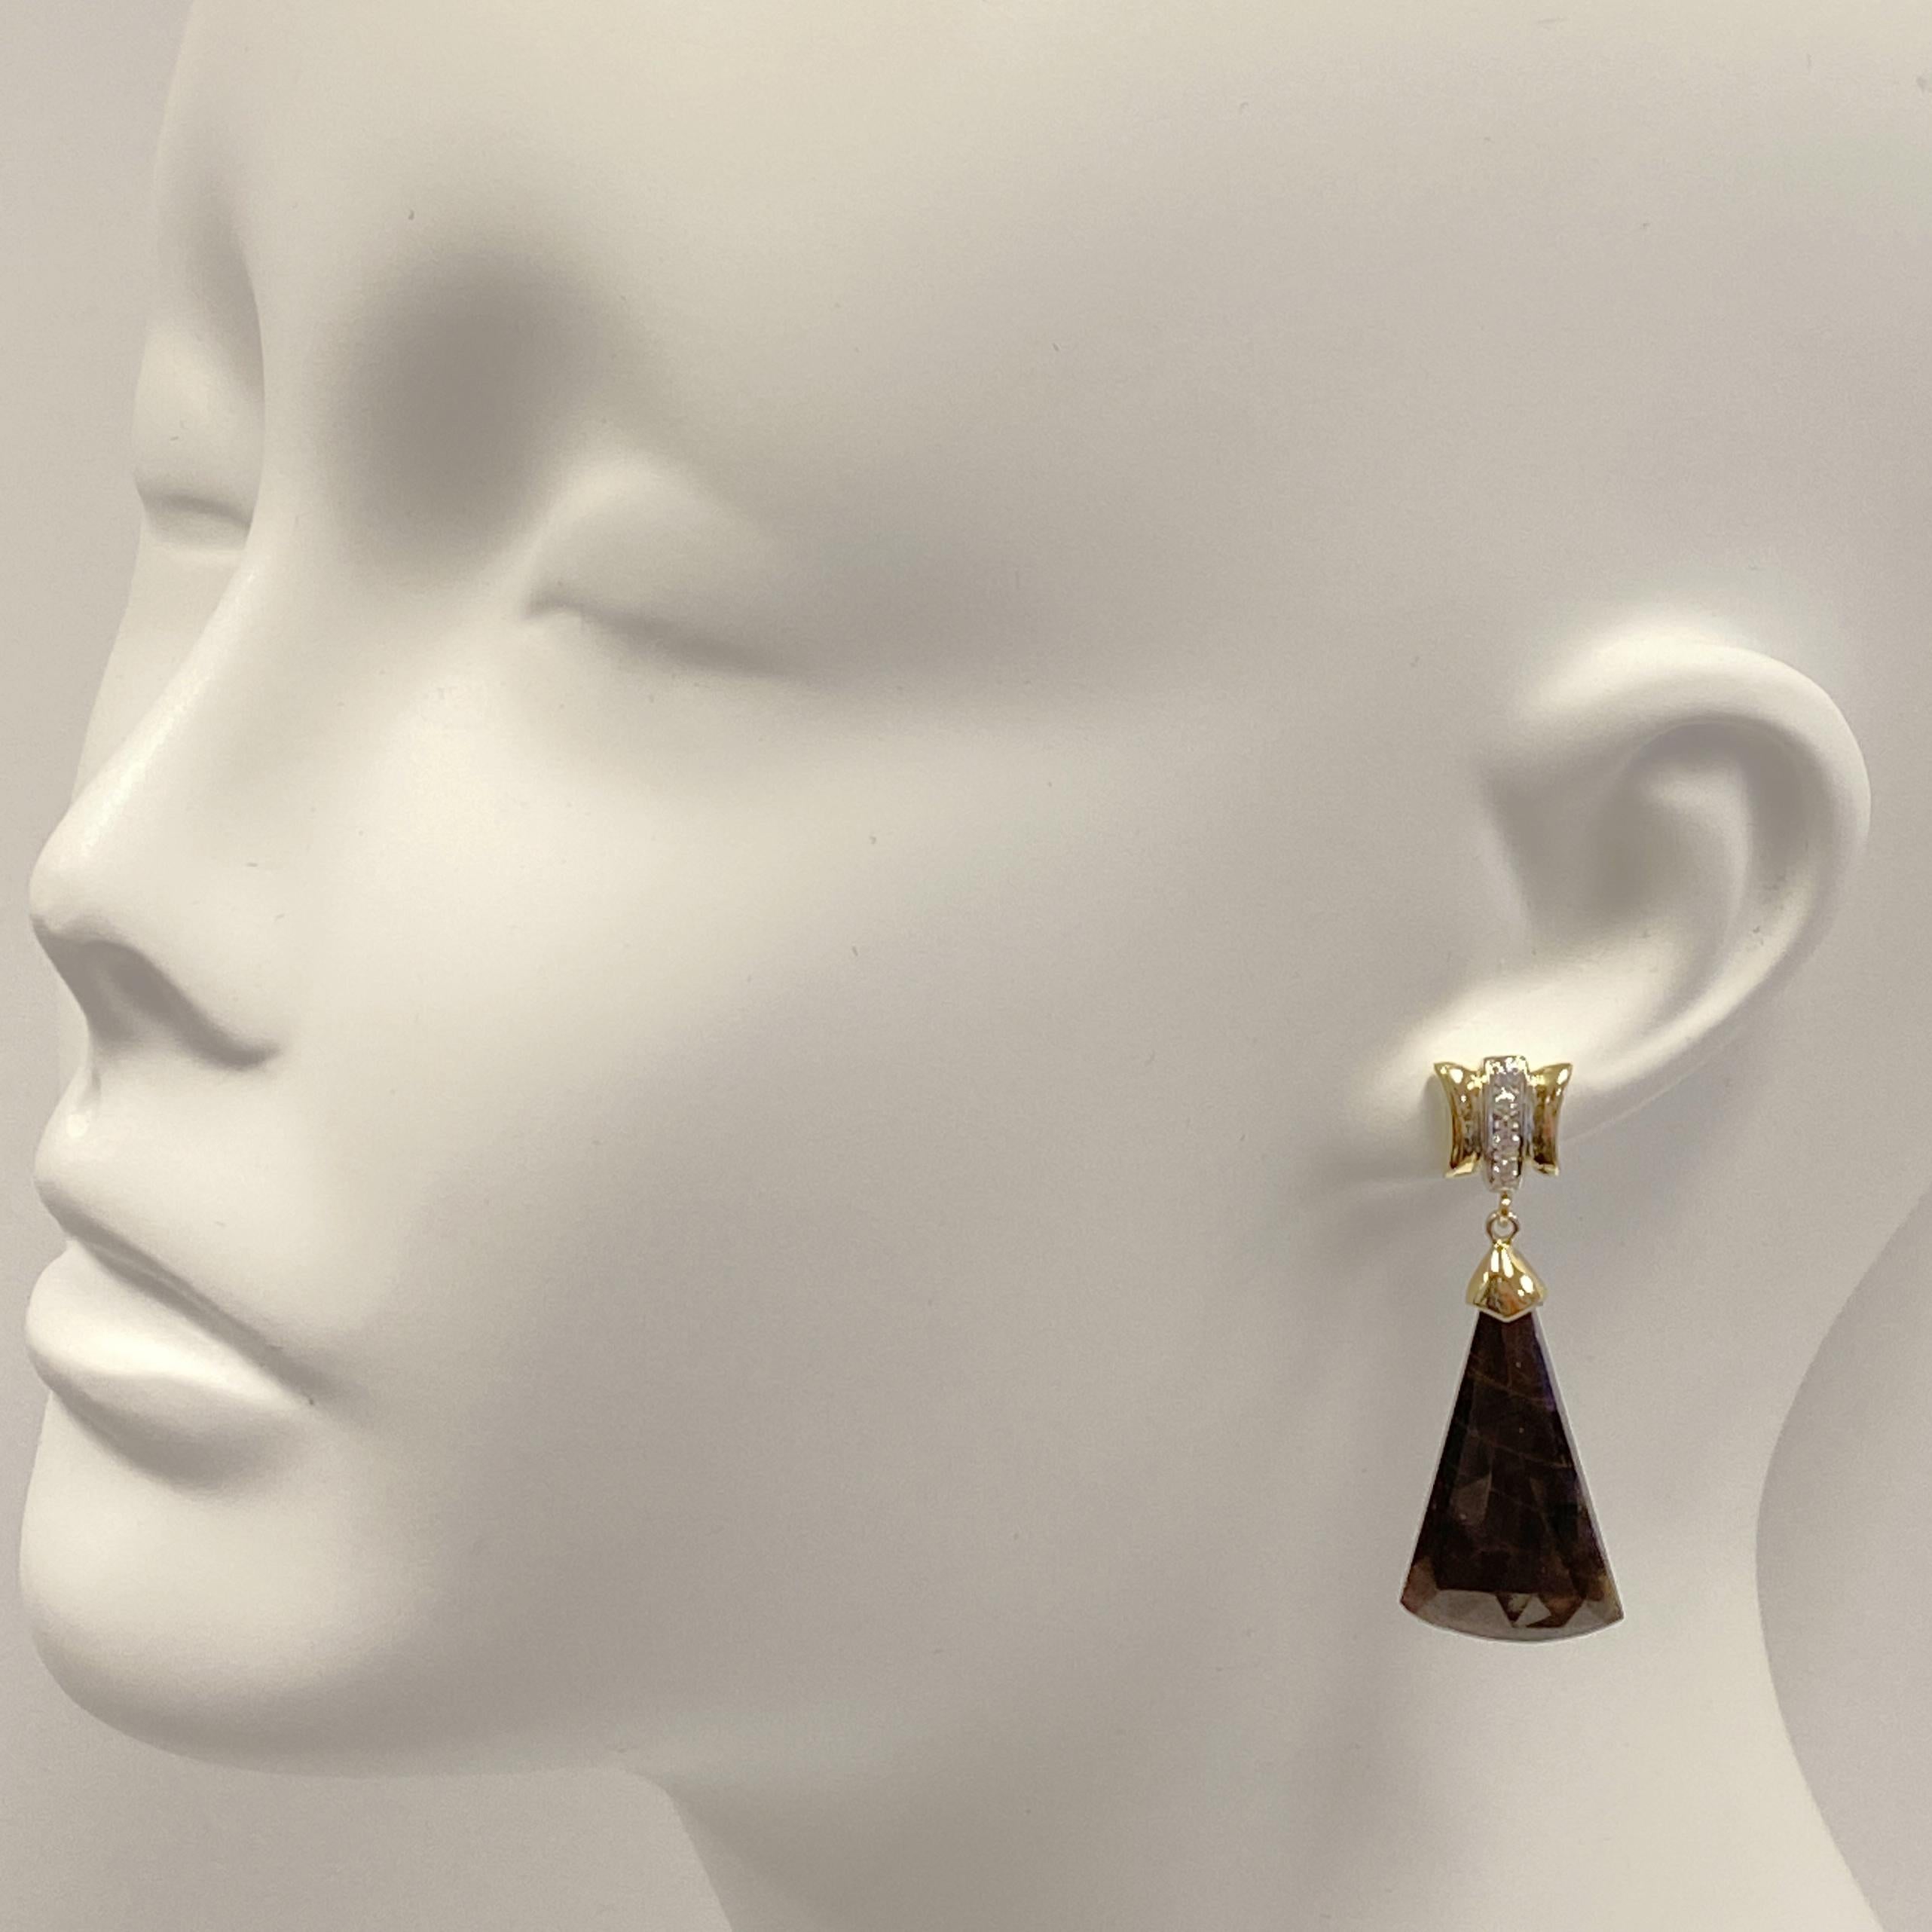 Eytan Brandes' new shimmery slice earrings feature natural brown sapphires and bright white diamonds in rich, unmistakable 18 karat gold.

The tops are actually left over links from an extremely expensive diamond bracelet Eytan shortened for a